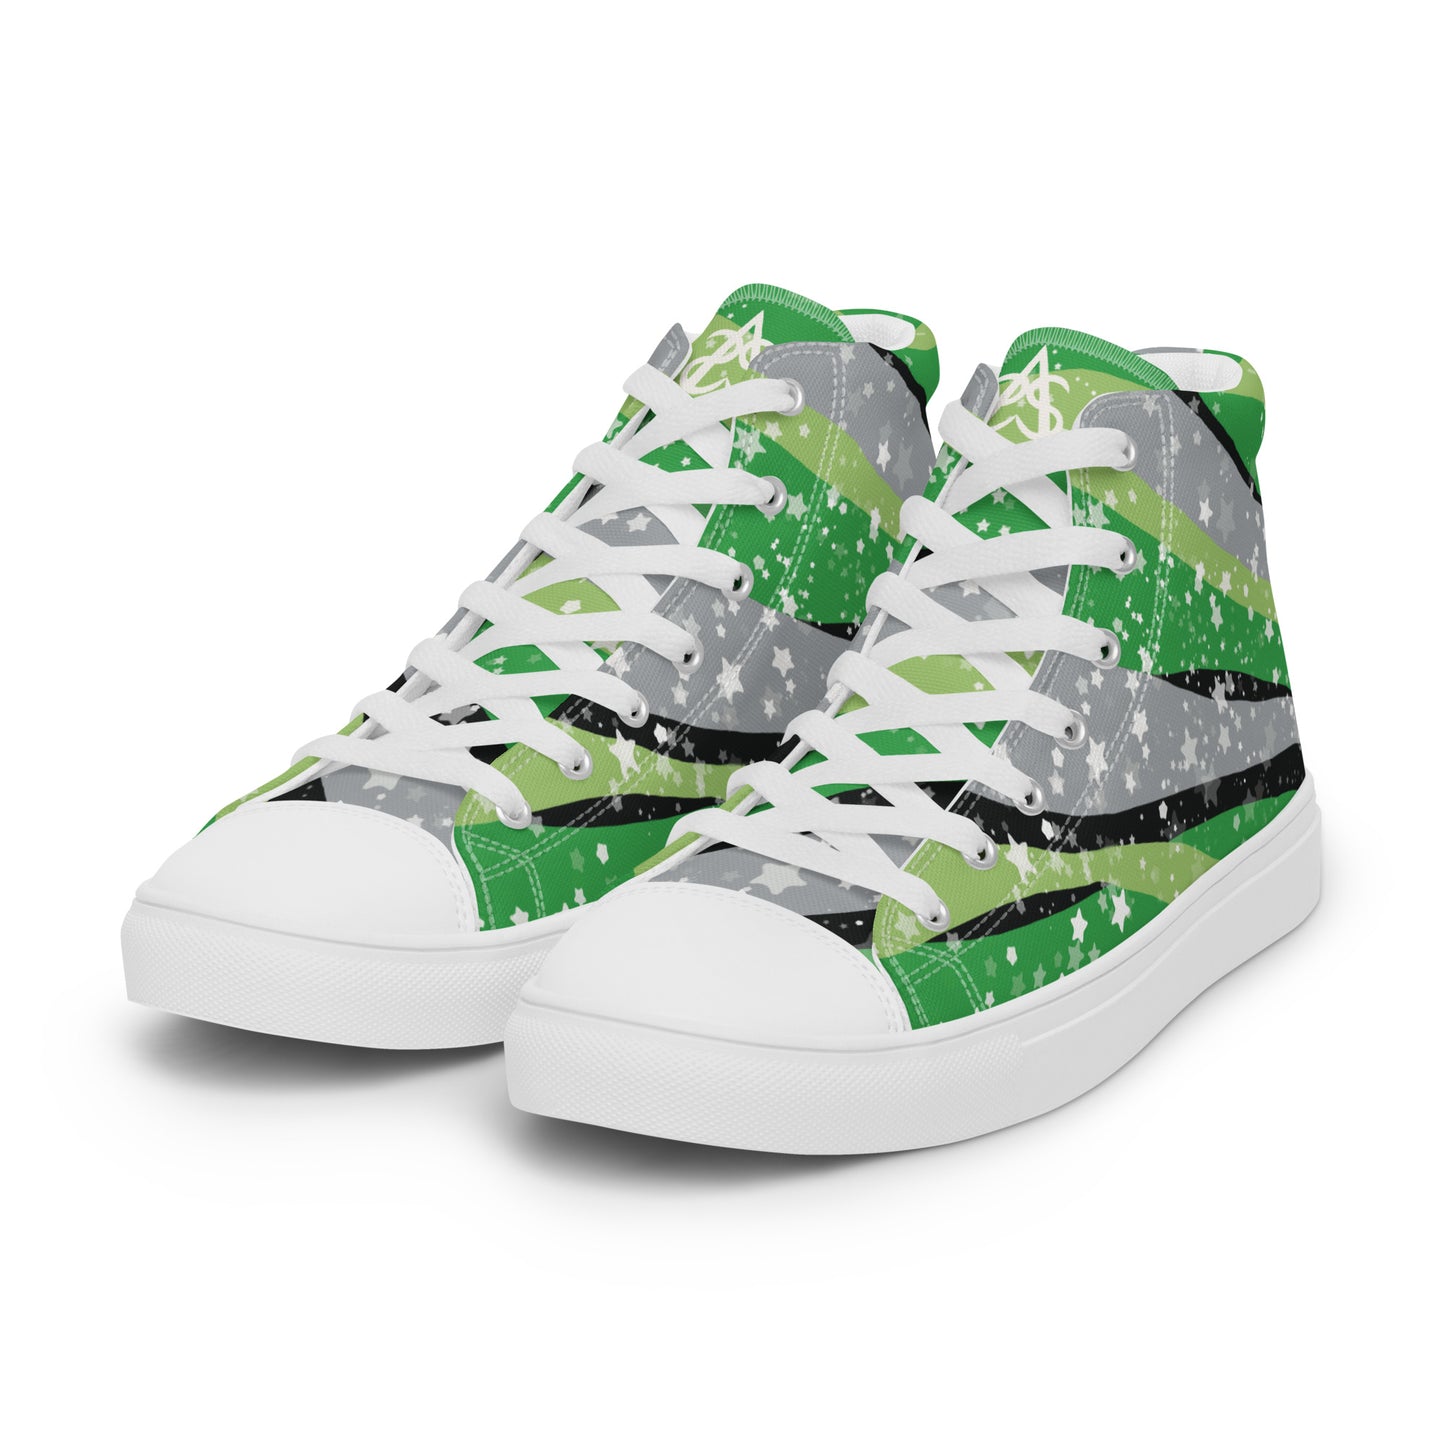 Left front view: a pair of high-top shoes with ribbons of the greens, grey, and black of the aromantic pride flag coming from the heel and expanding towards the laces with an explosion of stars over it, white accents, and the Aras Sivad Studio logo in white on the tongue.